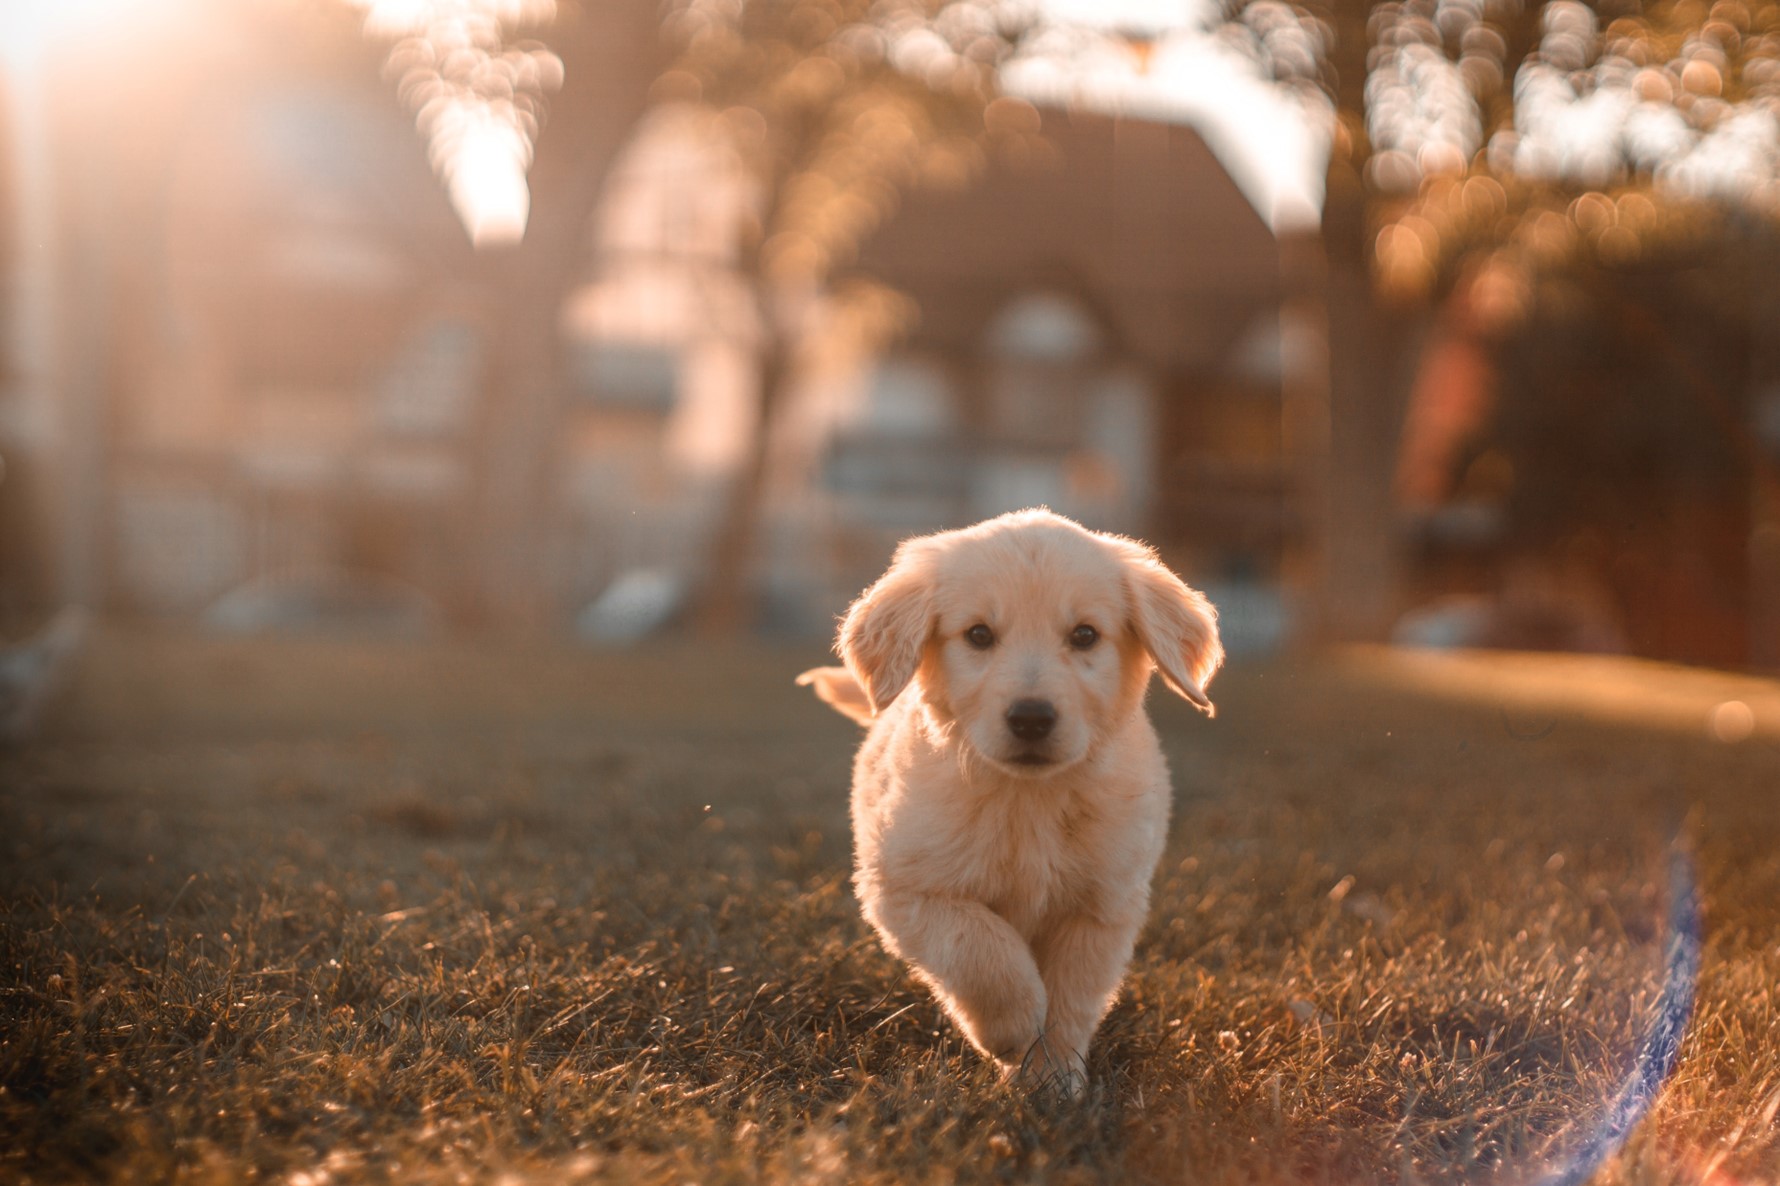 A labrador puppy running through grass with blurry trees in the background